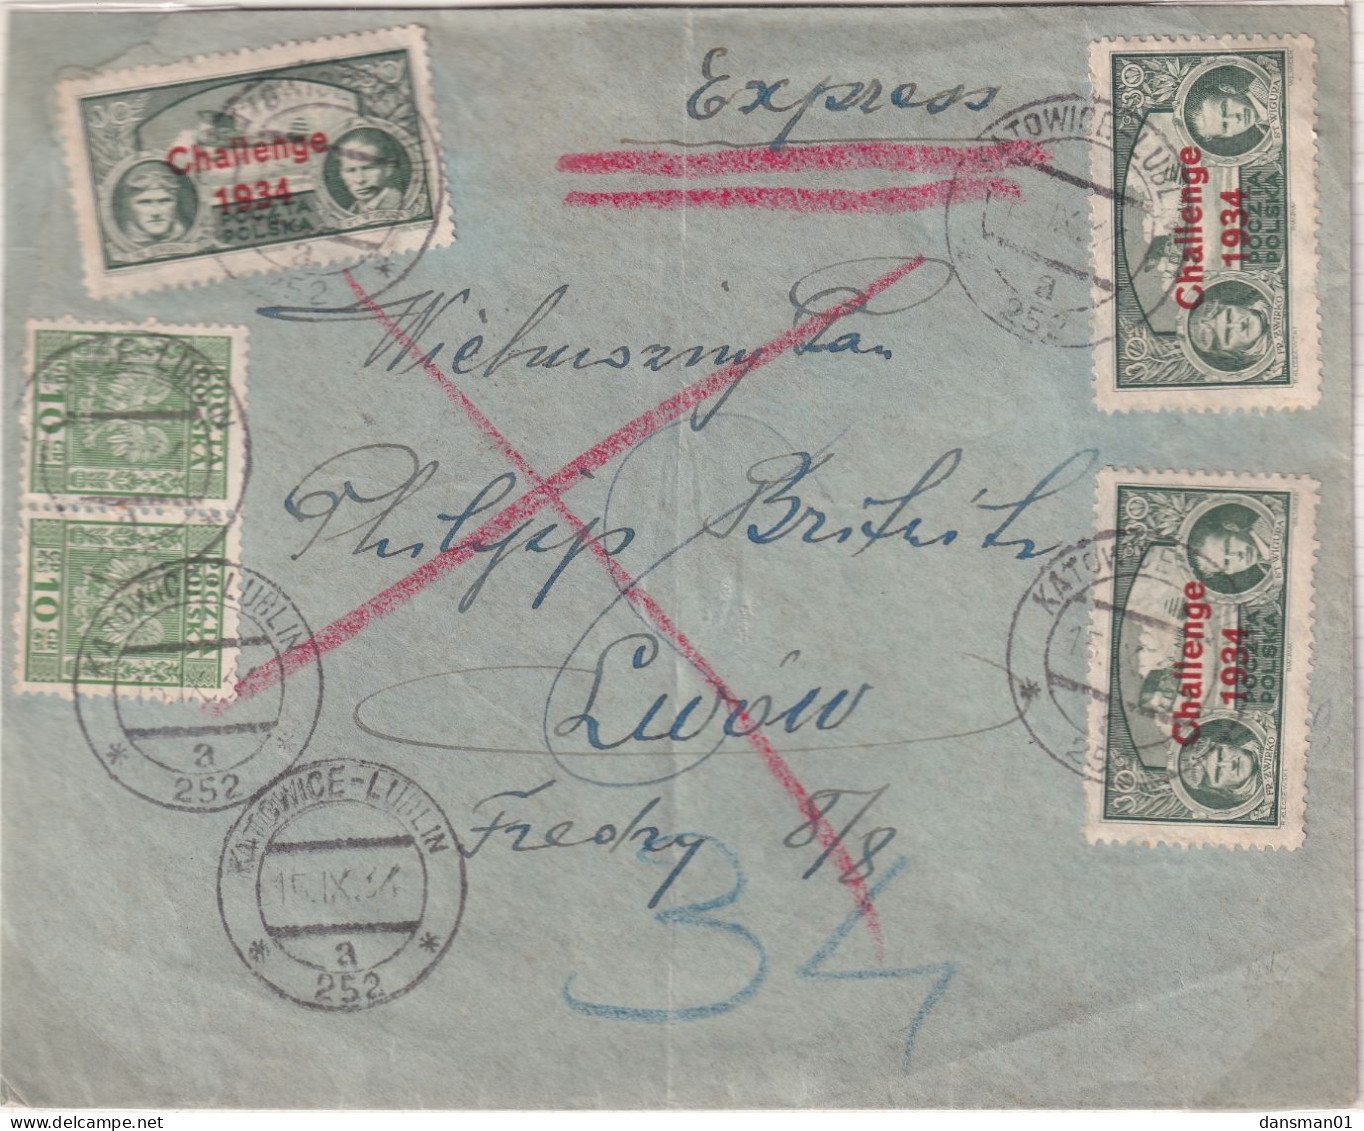 Poland 1934 Challenge Cover Fi 269 Katowice-Lublin To LWOW Railway Cancel - Lettres & Documents